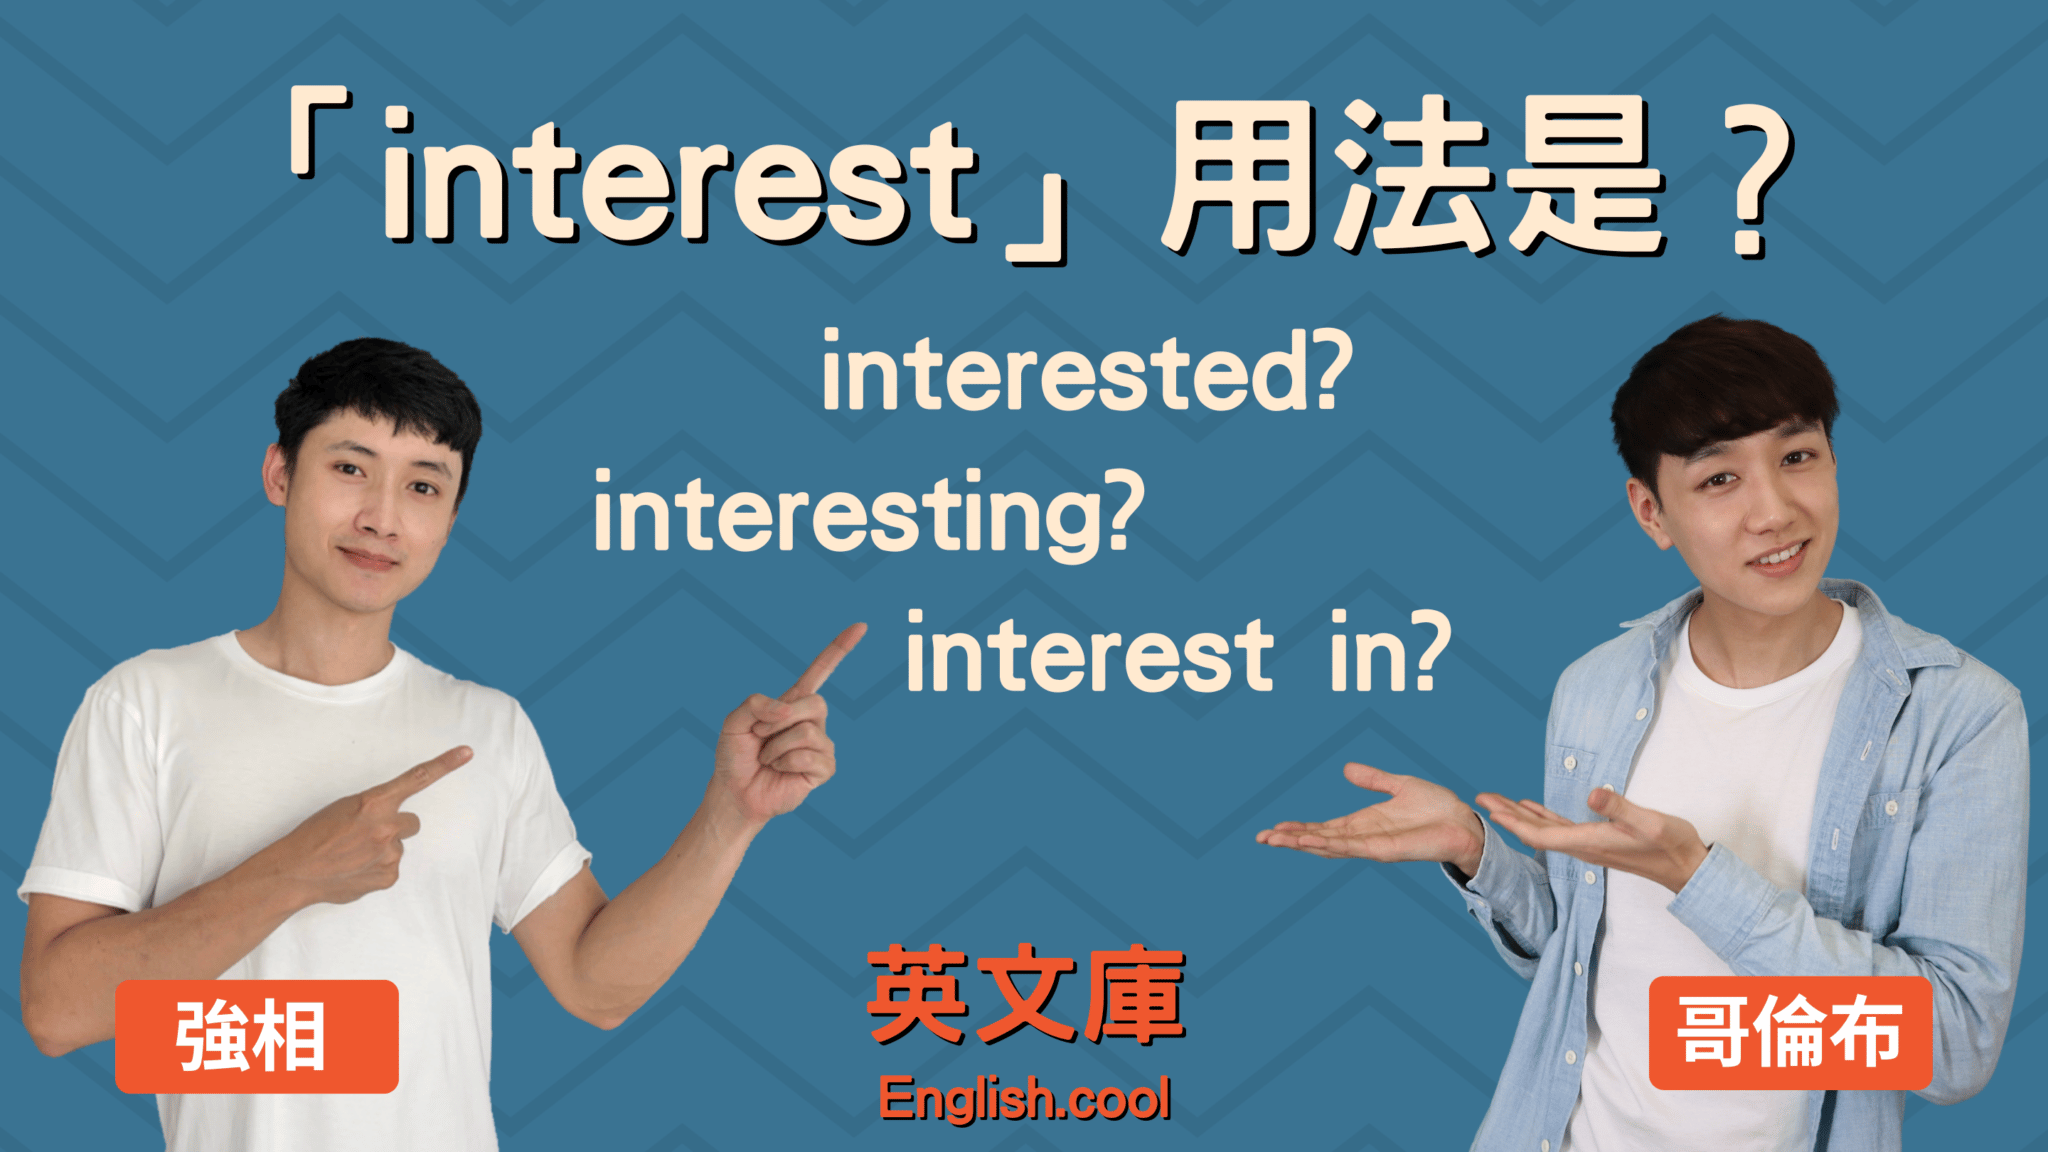 You are currently viewing 「interest」用法是？interested/ interesting/ interest in 來搞懂！